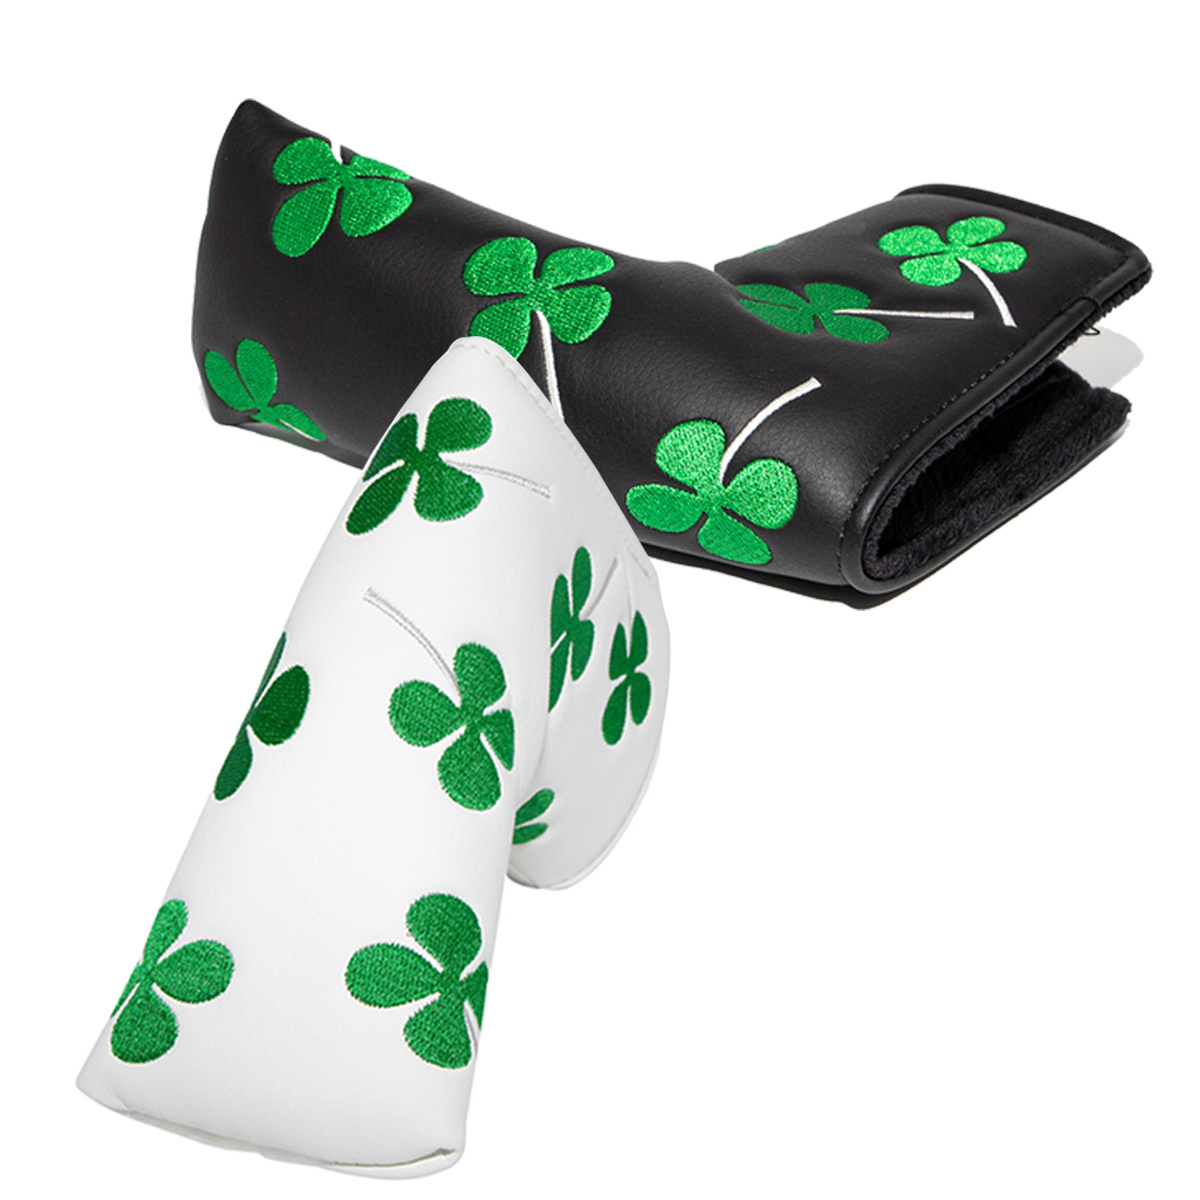 

1pc Waterproof Four-leaf Clover Golf Putter Head Cover - Durable Pu Leather Club Protector For Outdoor Sports